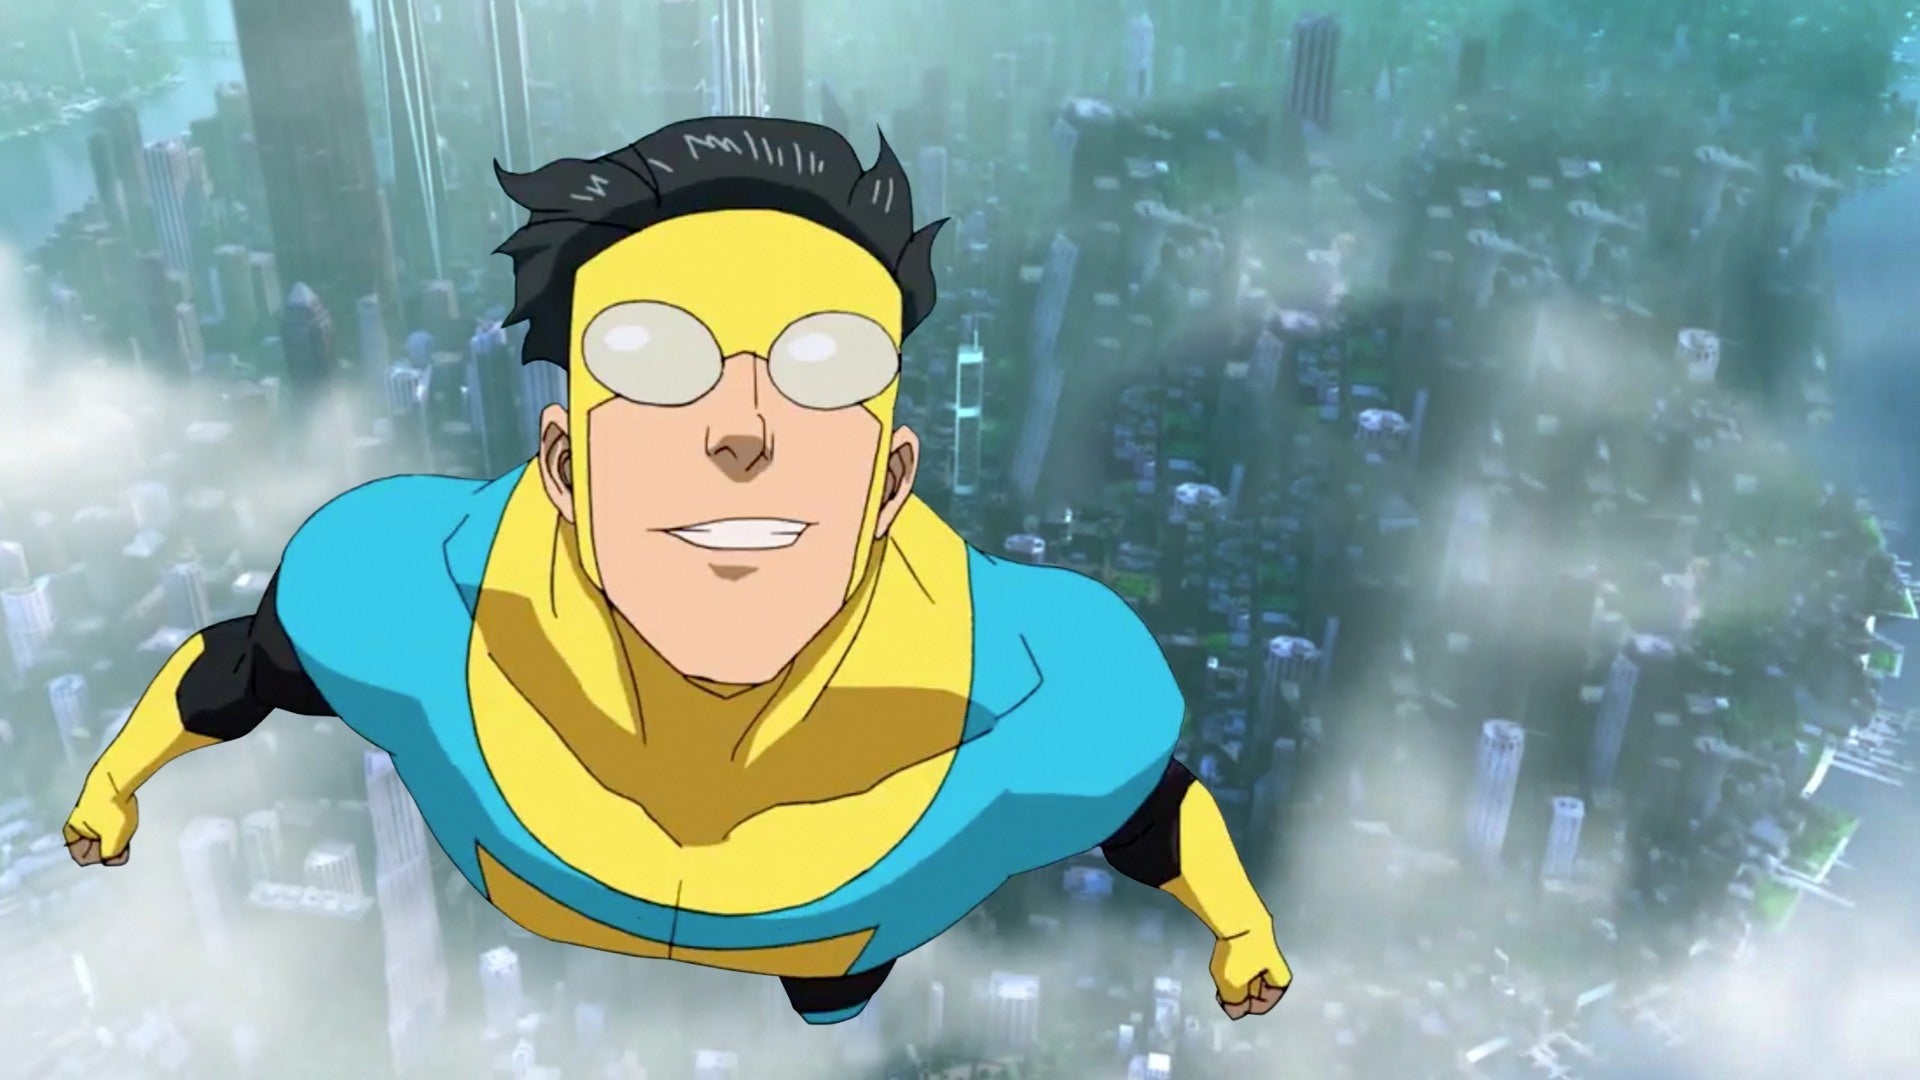 Is Invincible an anime? - Quora